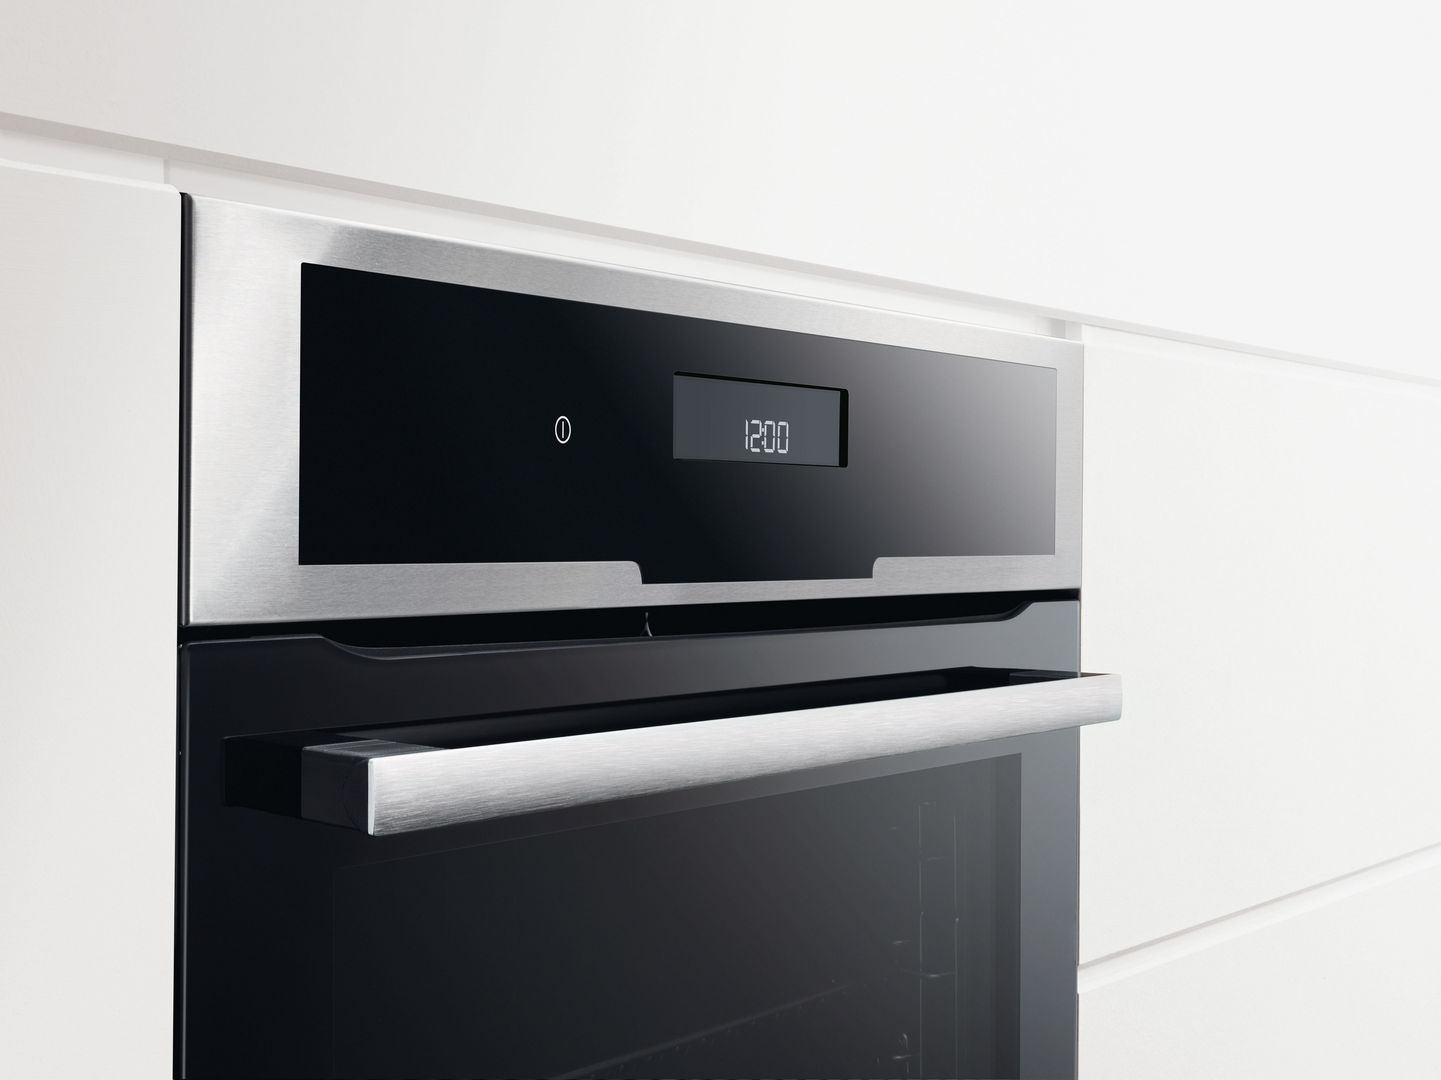 Electrolux 2D oven